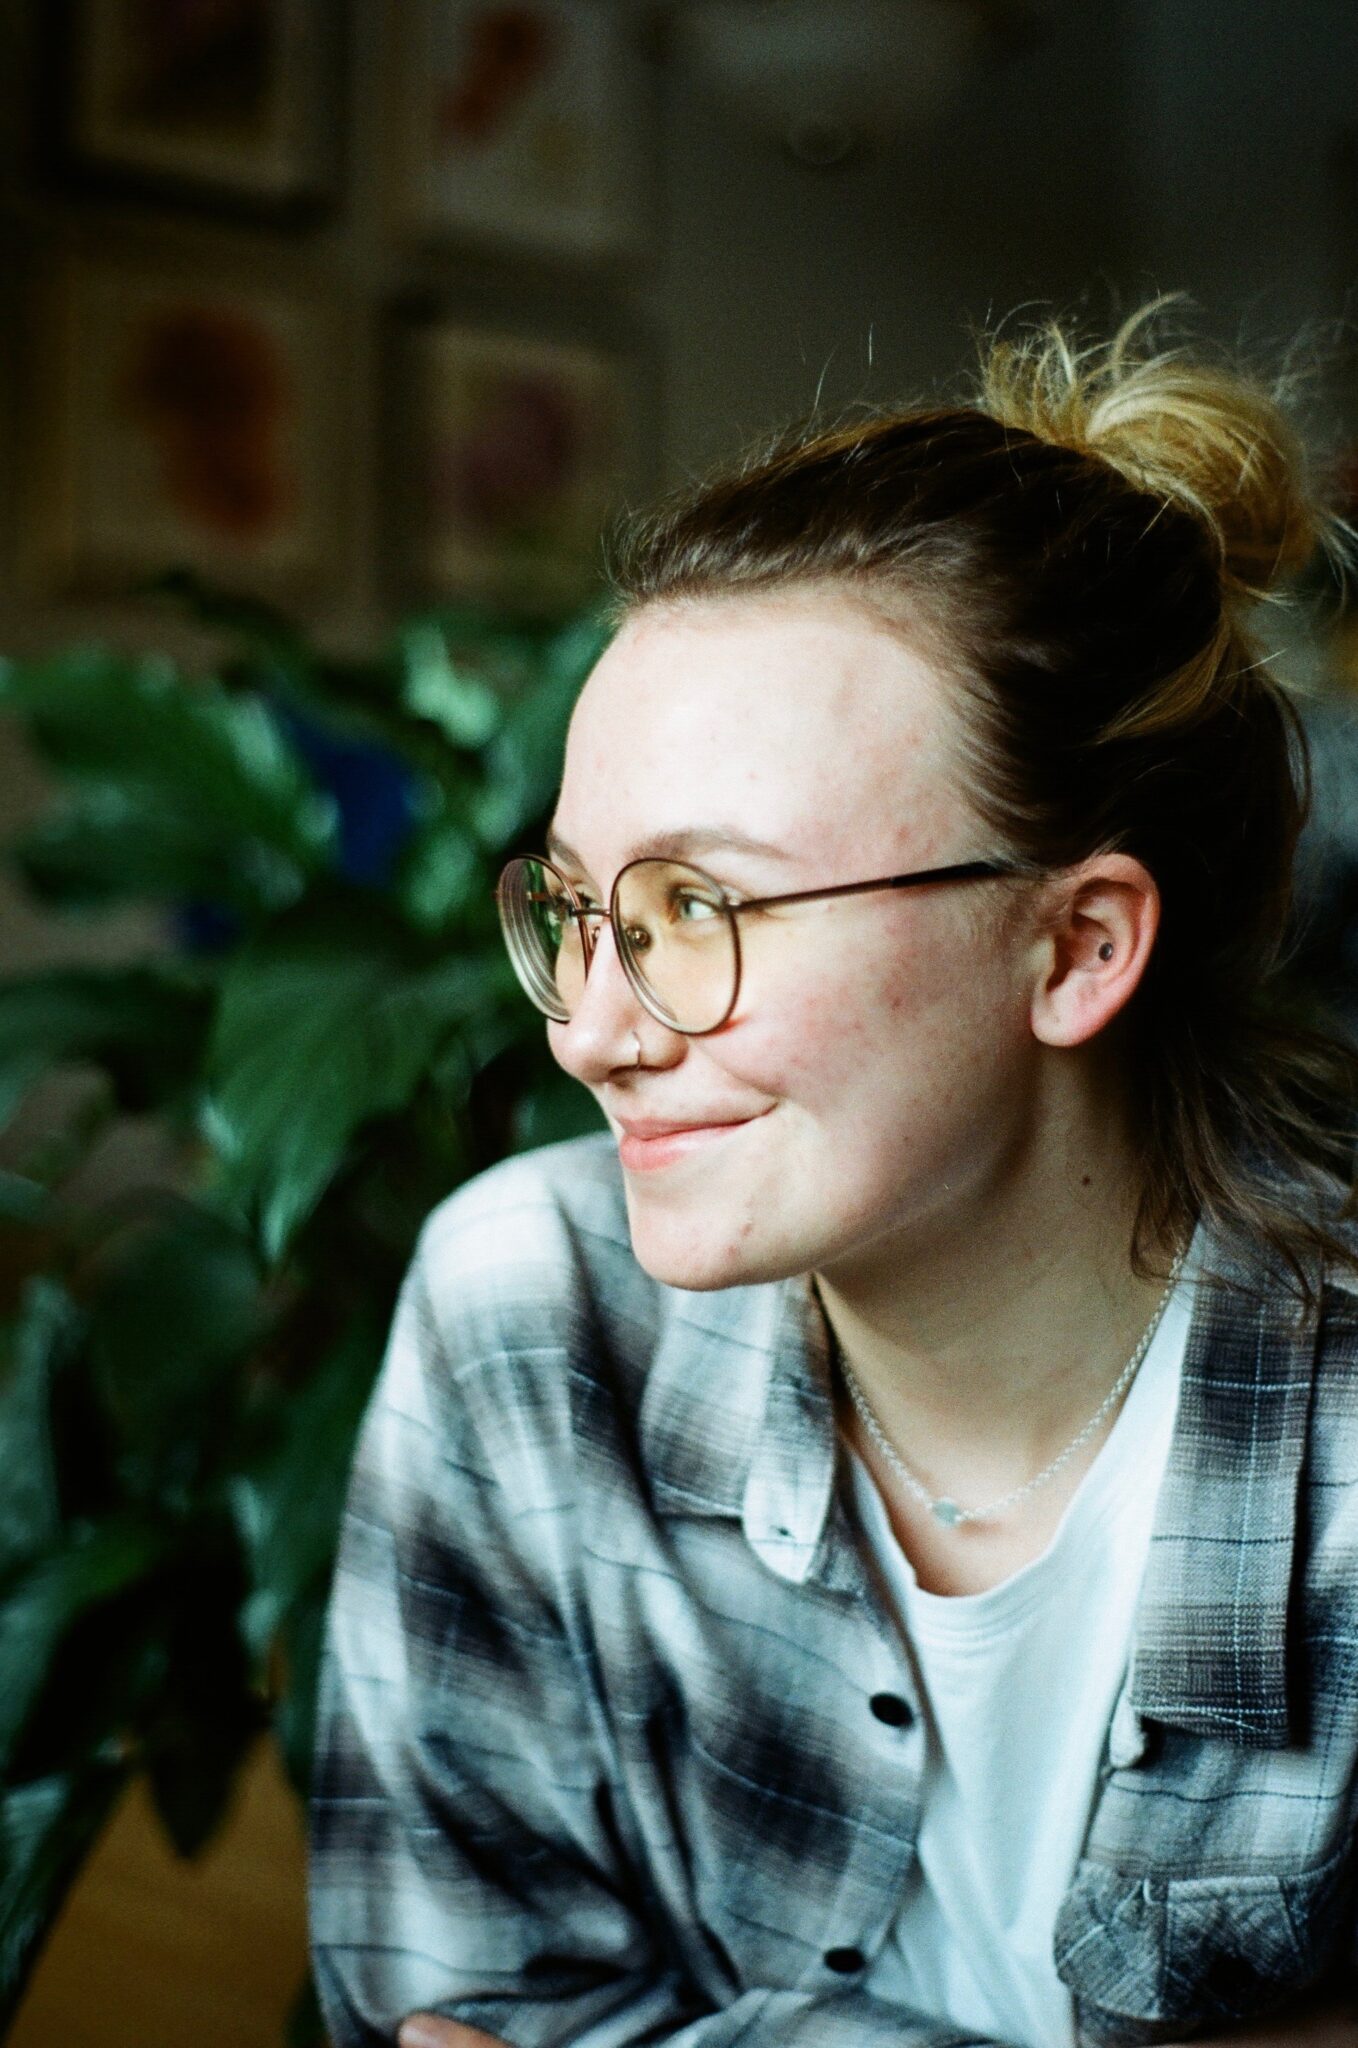 Side profile of person with their light hair pulled back in a bun, glasses, and a grey plaid shirt.